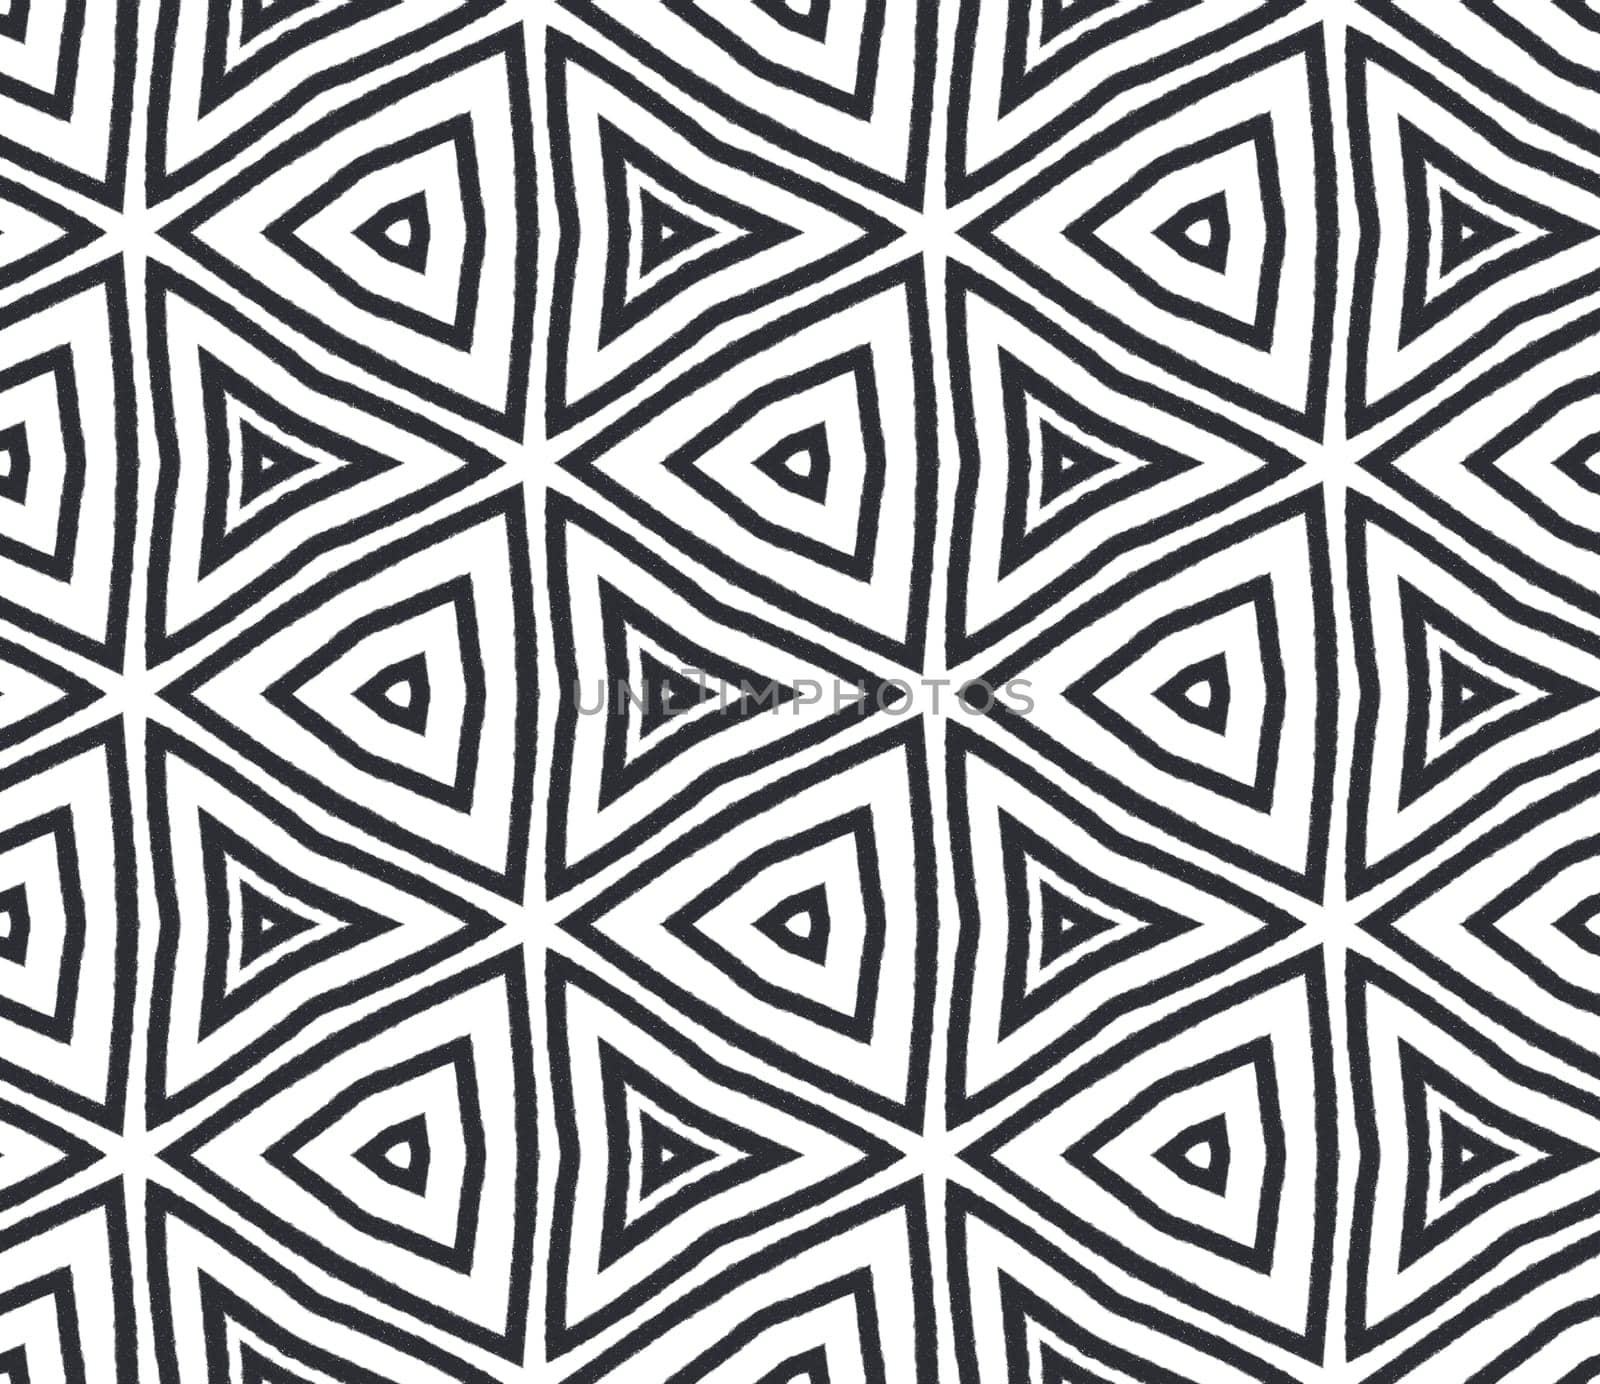 Ethnic hand painted pattern. Black symmetrical by beginagain